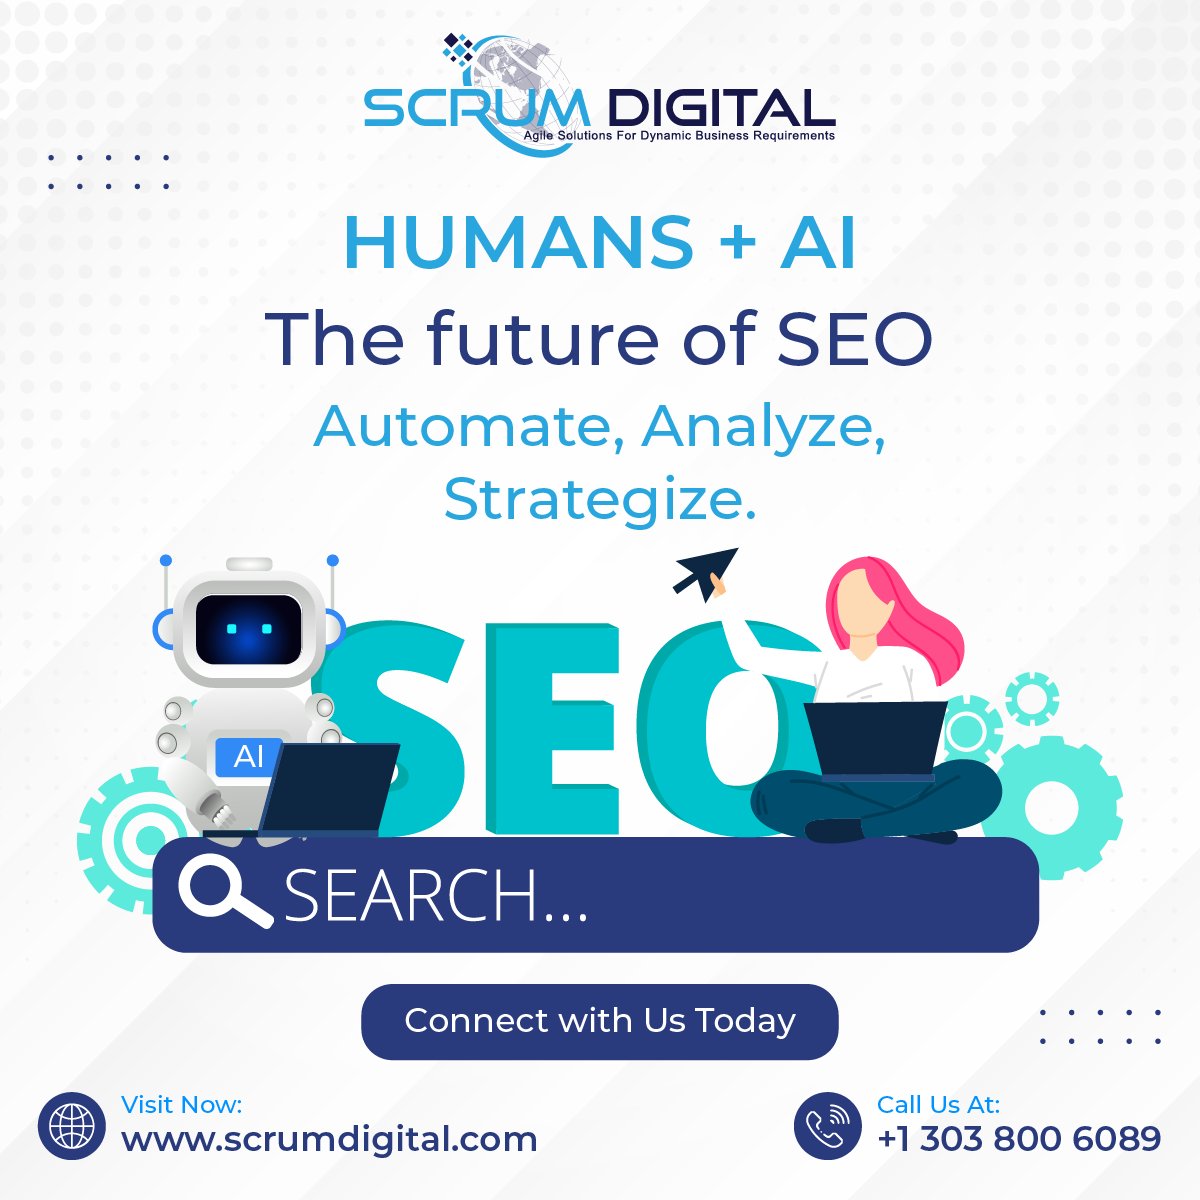 At Scrum Digital, we blend the latest in AI technology with the expertise of our SEO strategists to automate processes, analyze data, & craft winning strategies that propel your brand to the top. Get in touch today.

Visit: bit.ly/3tXfBZa

#HumanAIHarmony #SEOSuccess